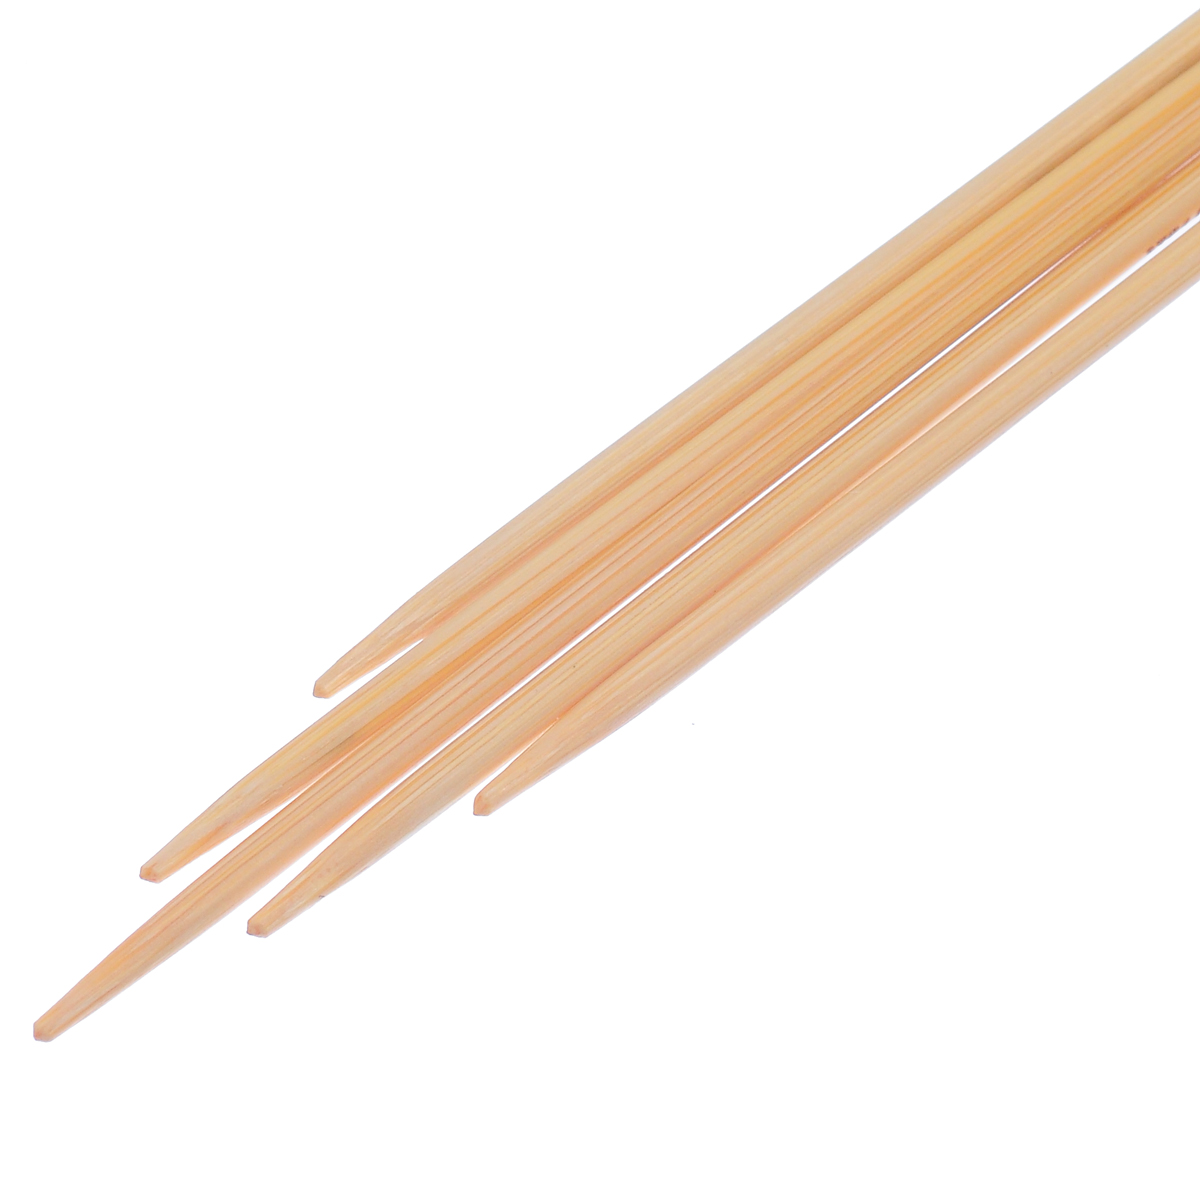 Picture of (UK12 2.75mm) Bamboo Double Pointed Knitting Needles Natural 15cm(5 7/8") long, 1 Set ( 5 PCs/Set)